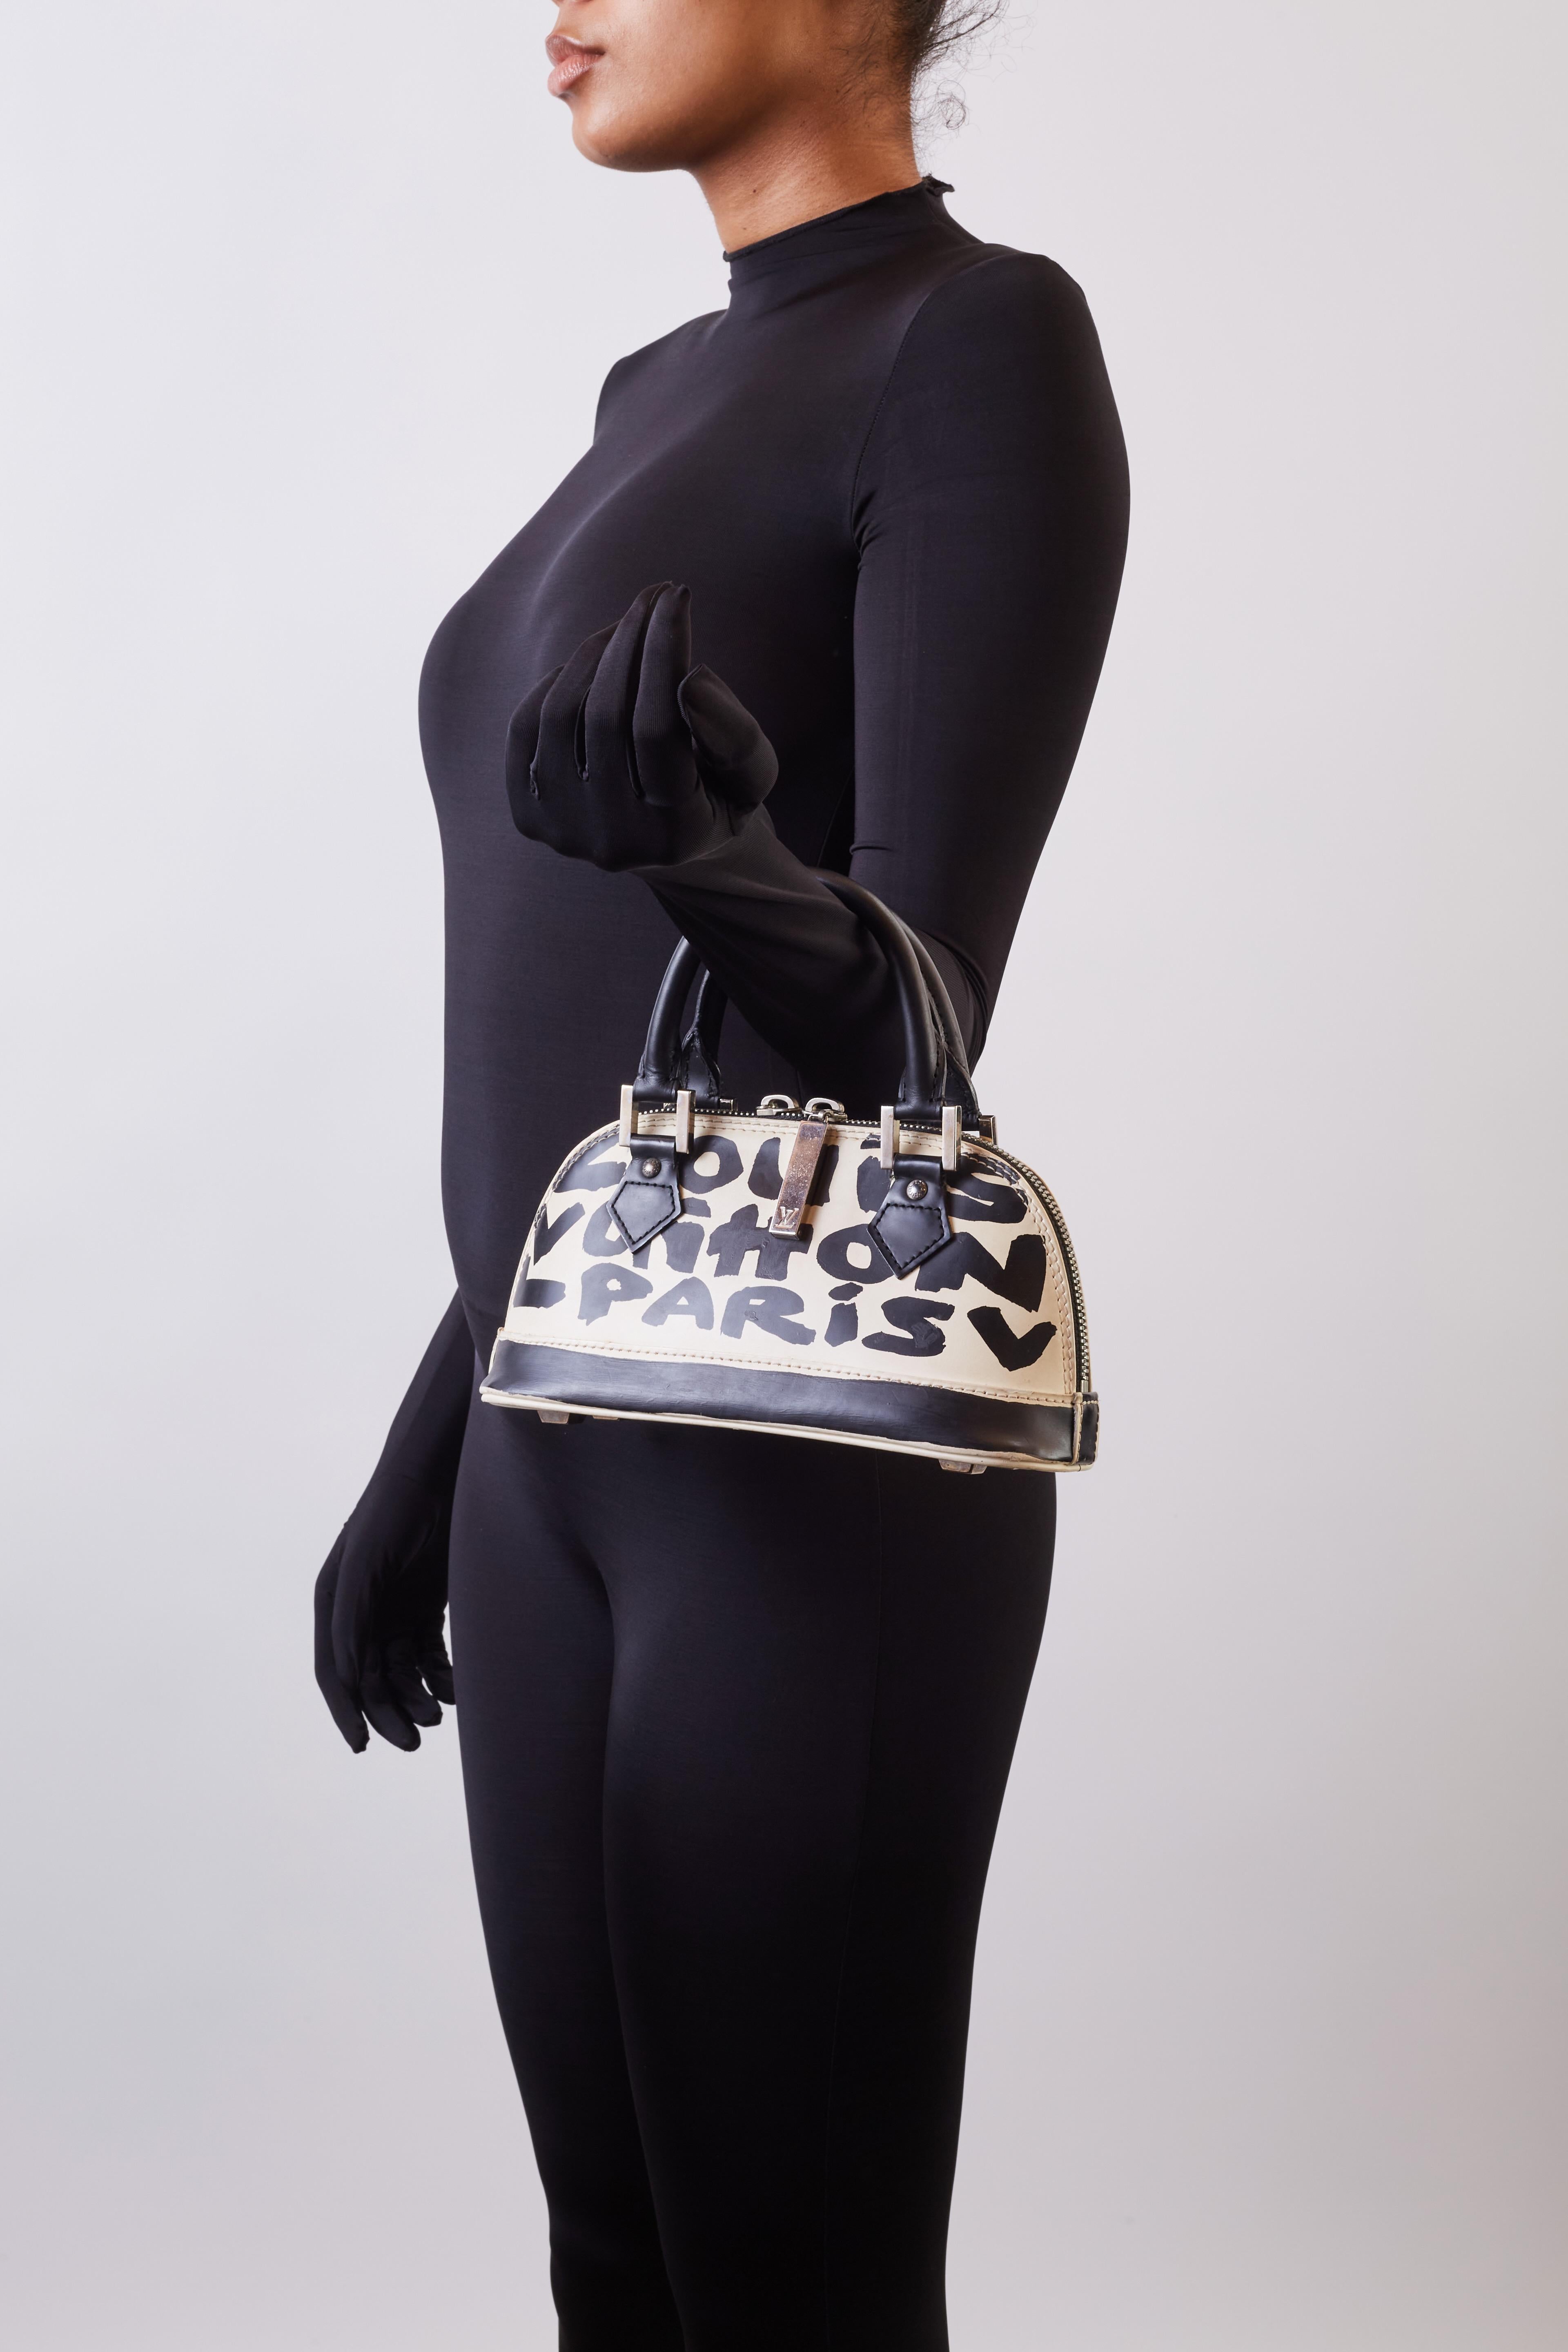 This Alma MM handbag by Stephen Sprouse comes with in white with a layer of Sprouse inspired Graffiti reading Louis Vuitton Paris.
This bag is crafted of white leather printed with lv brand in black on white. The bag features dual rolled leather top